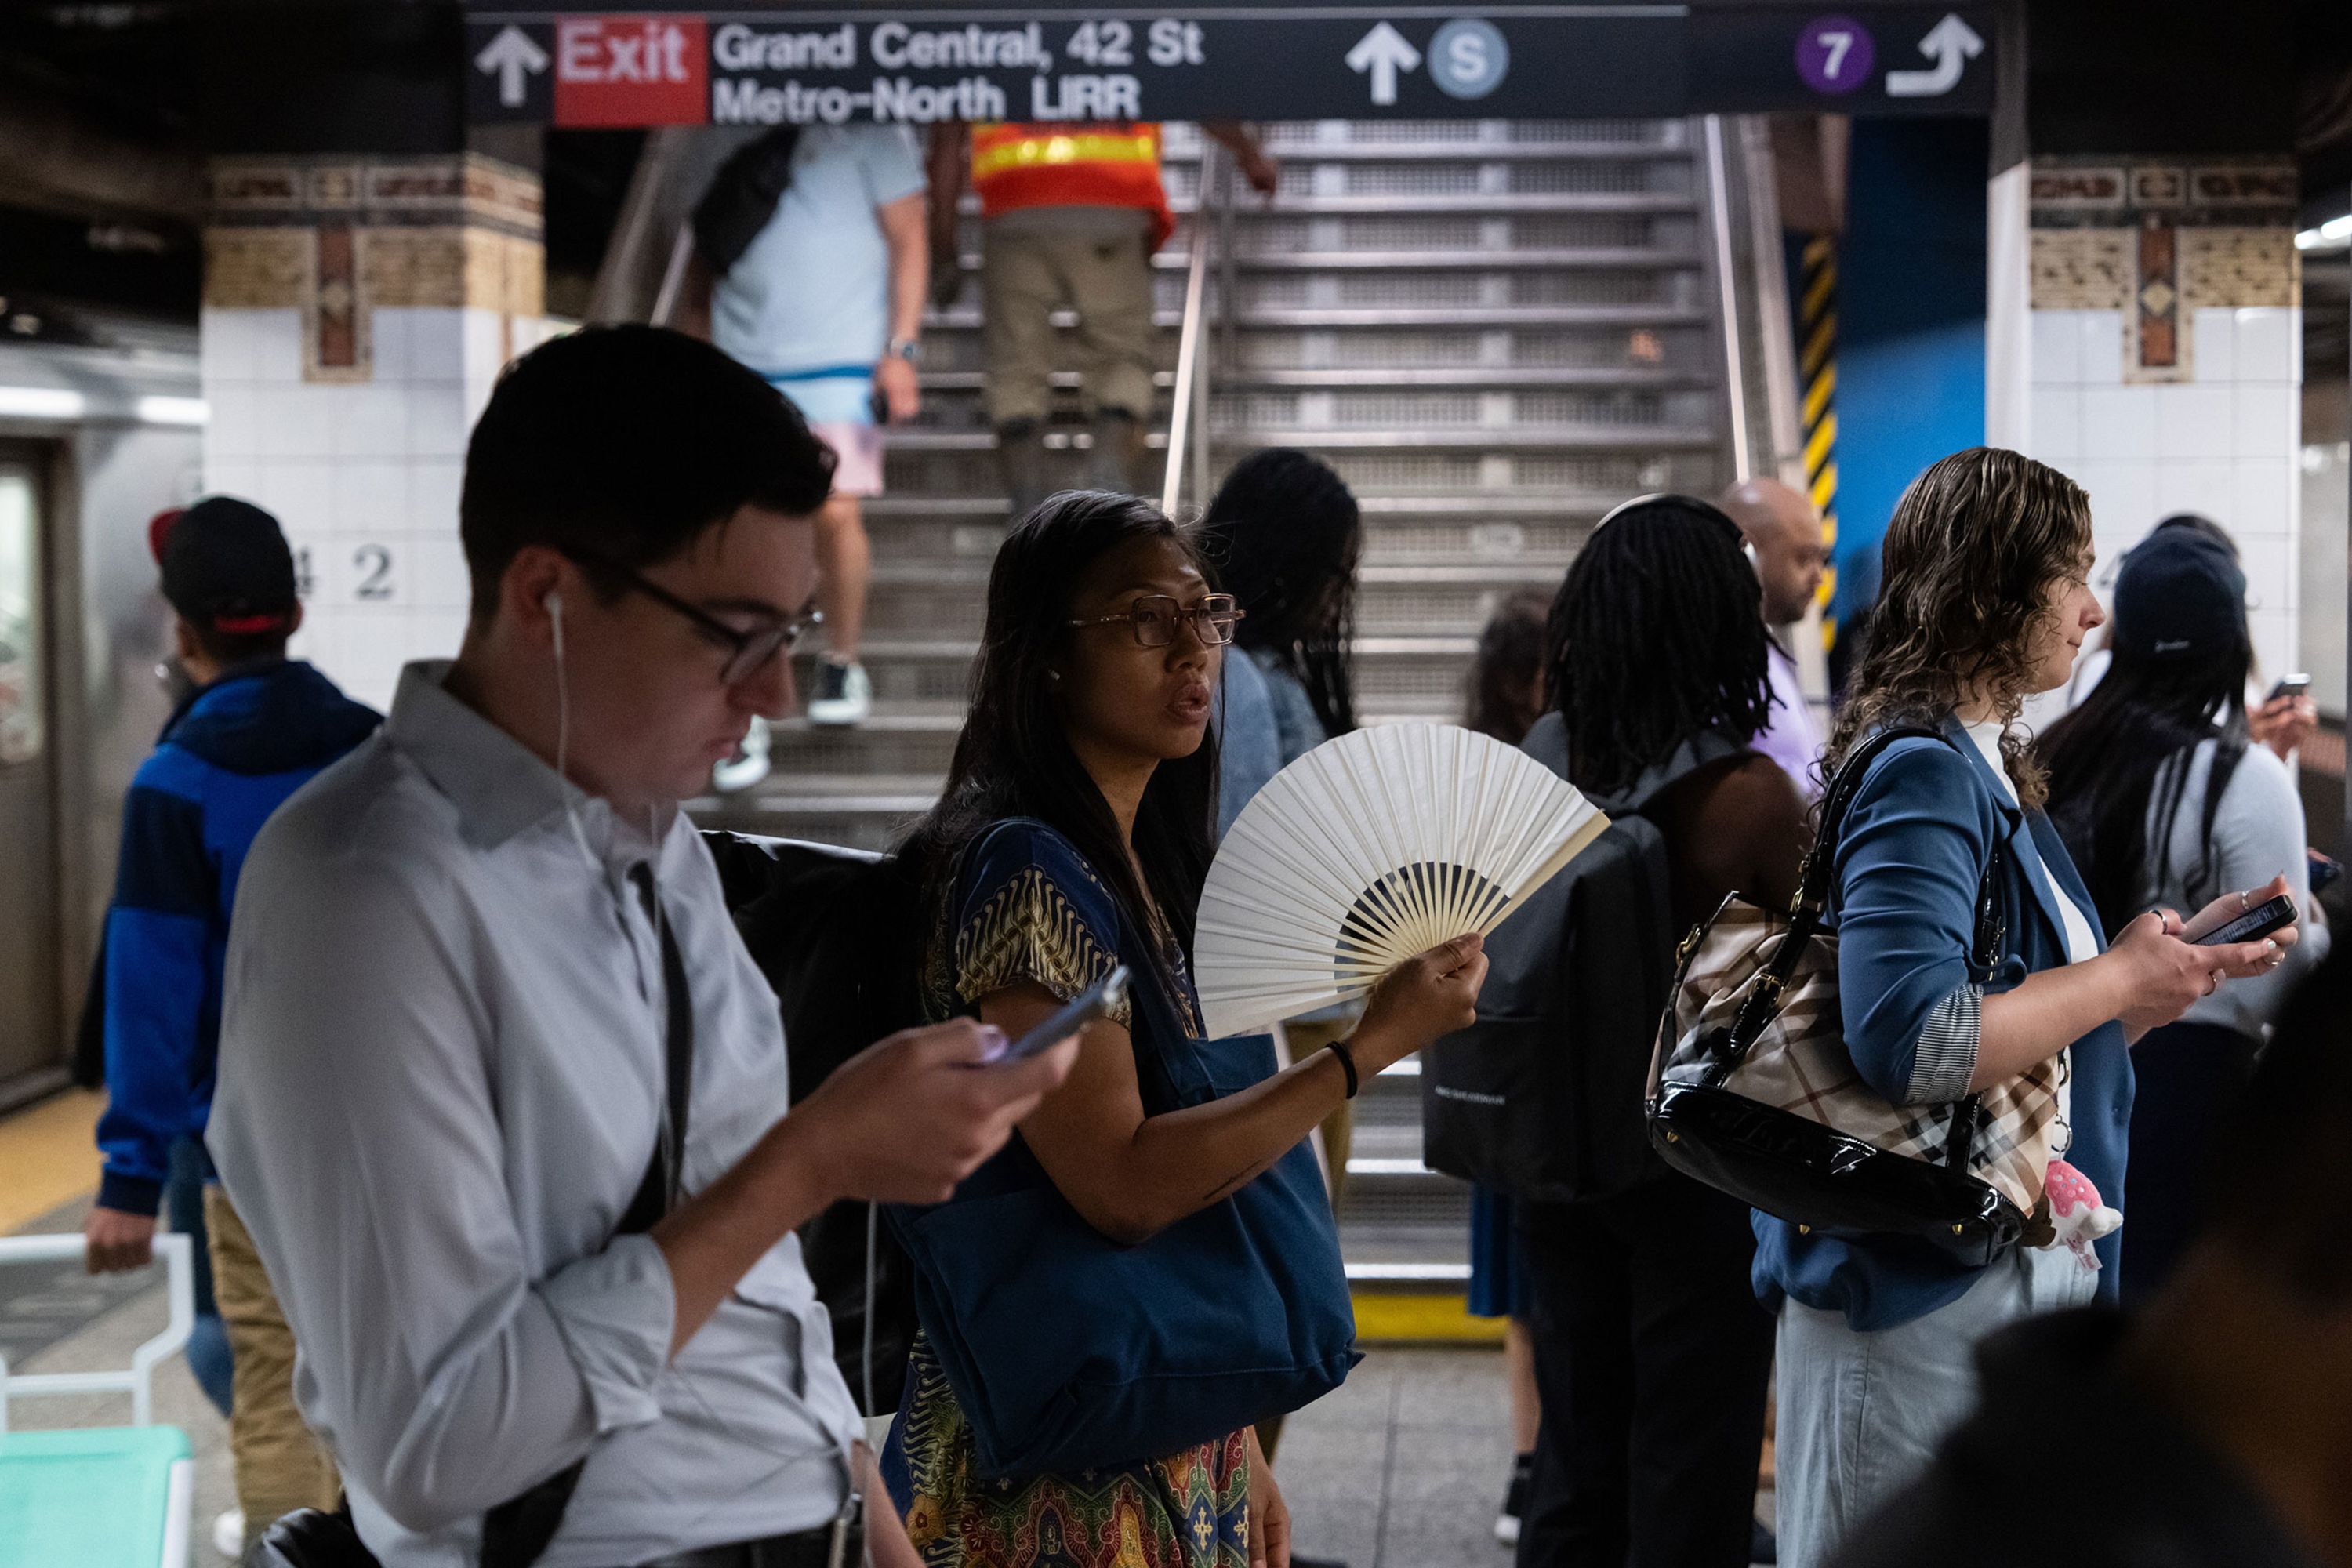 A commuter uses a fan to cool off while waiting for a train at a New York City subway station on Thursday, June 20.